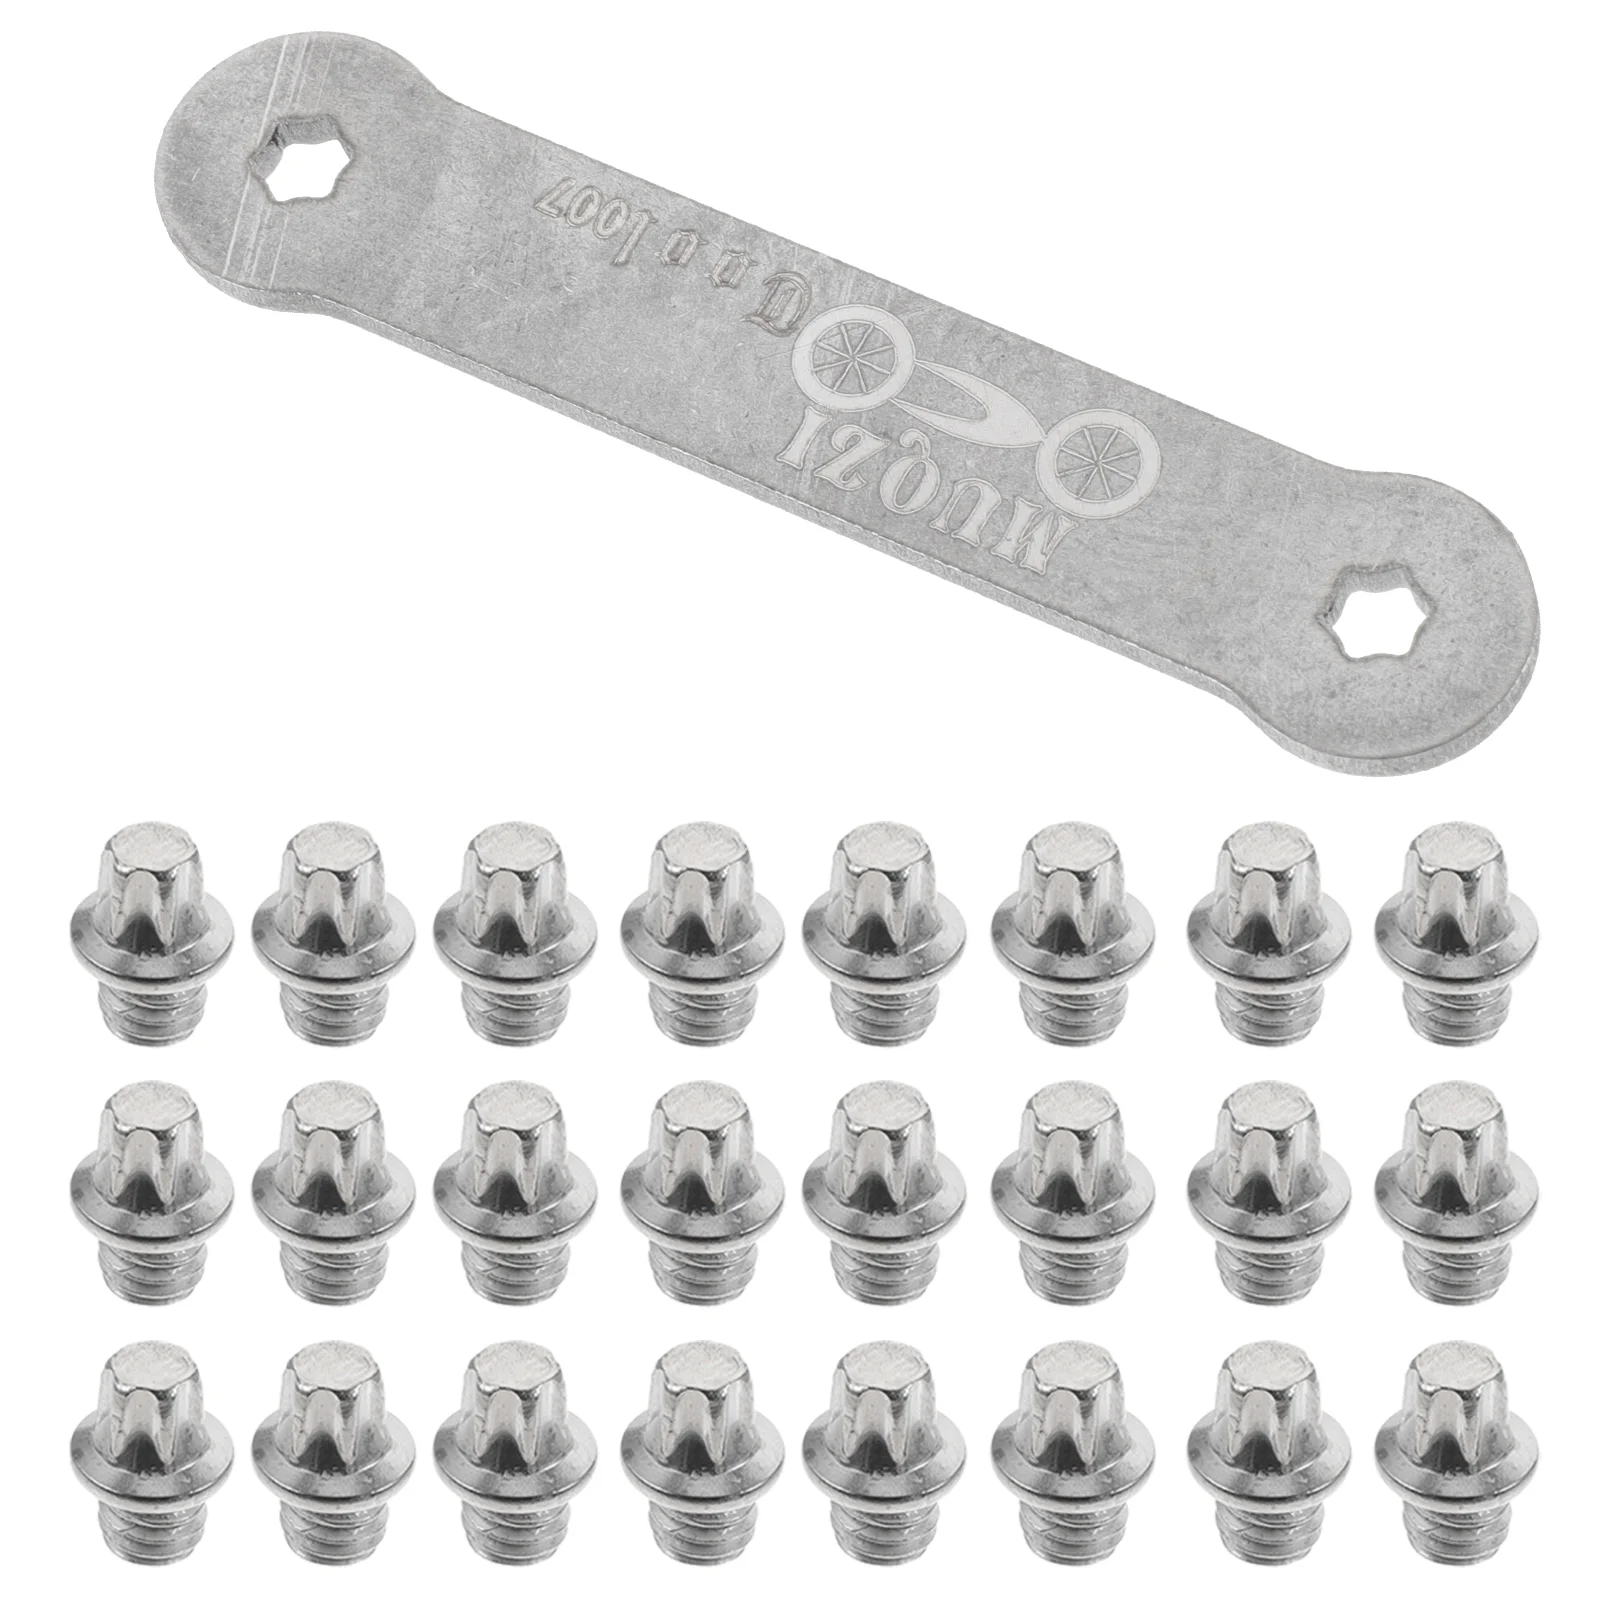 

51Pcs Practical Bicycles Pedal Bolts Anti Skid Nails Bike Accessories (Silver)